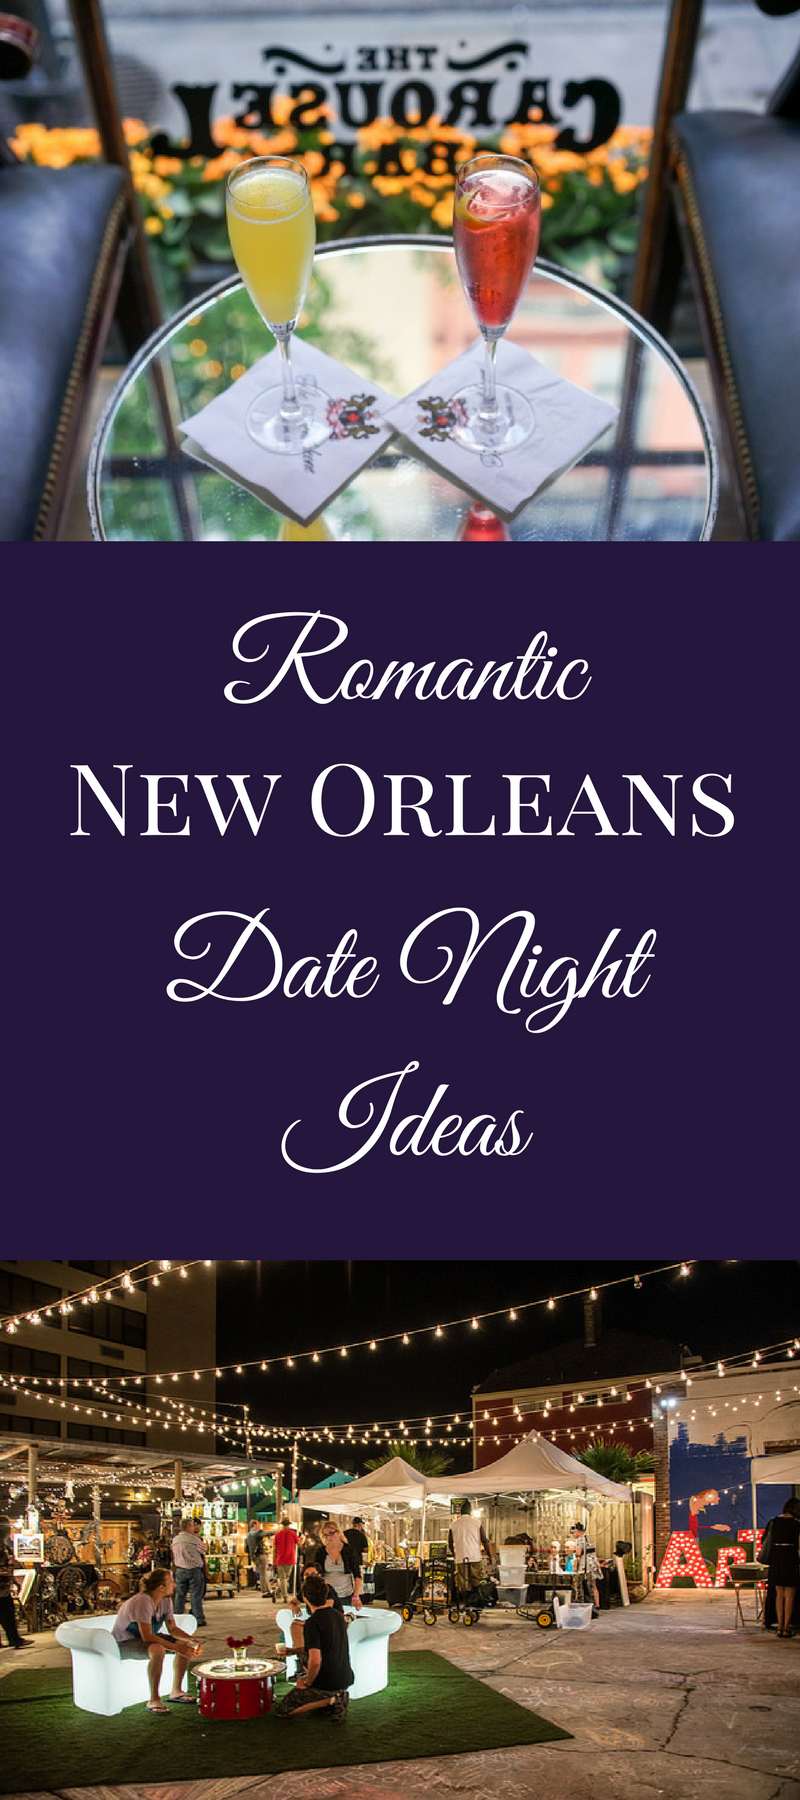 dating ideas in new orleans